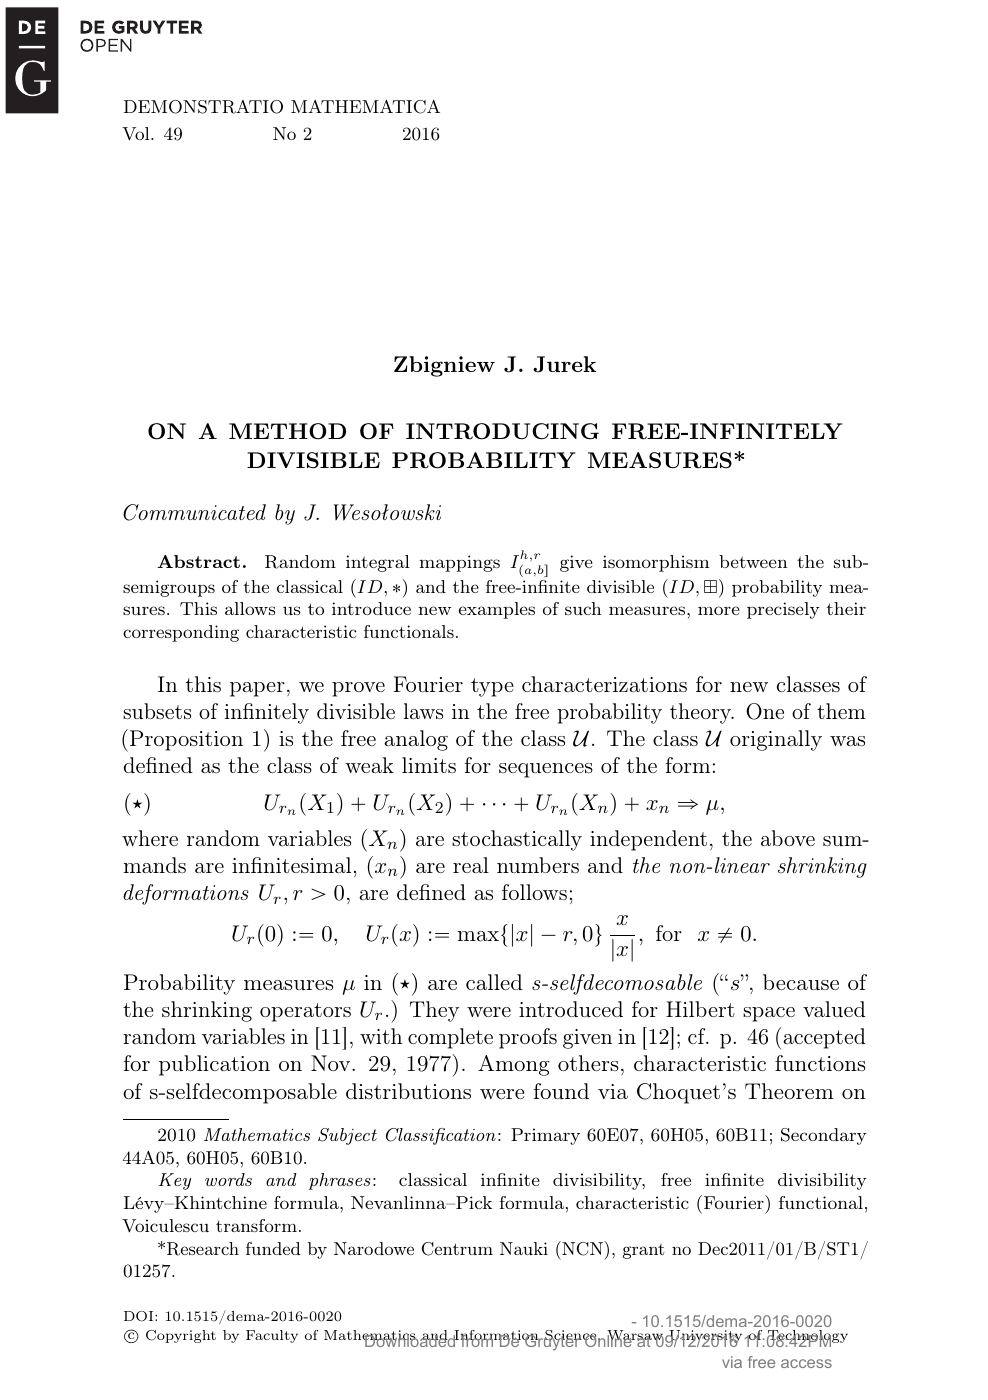 On A Method Of Introducing Free Infinitely Divisible Probability Measures Topic Of Research Paper In Mathematics Download Scholarly Article Pdf And Read For Free On Cyberleninka Open Science Hub